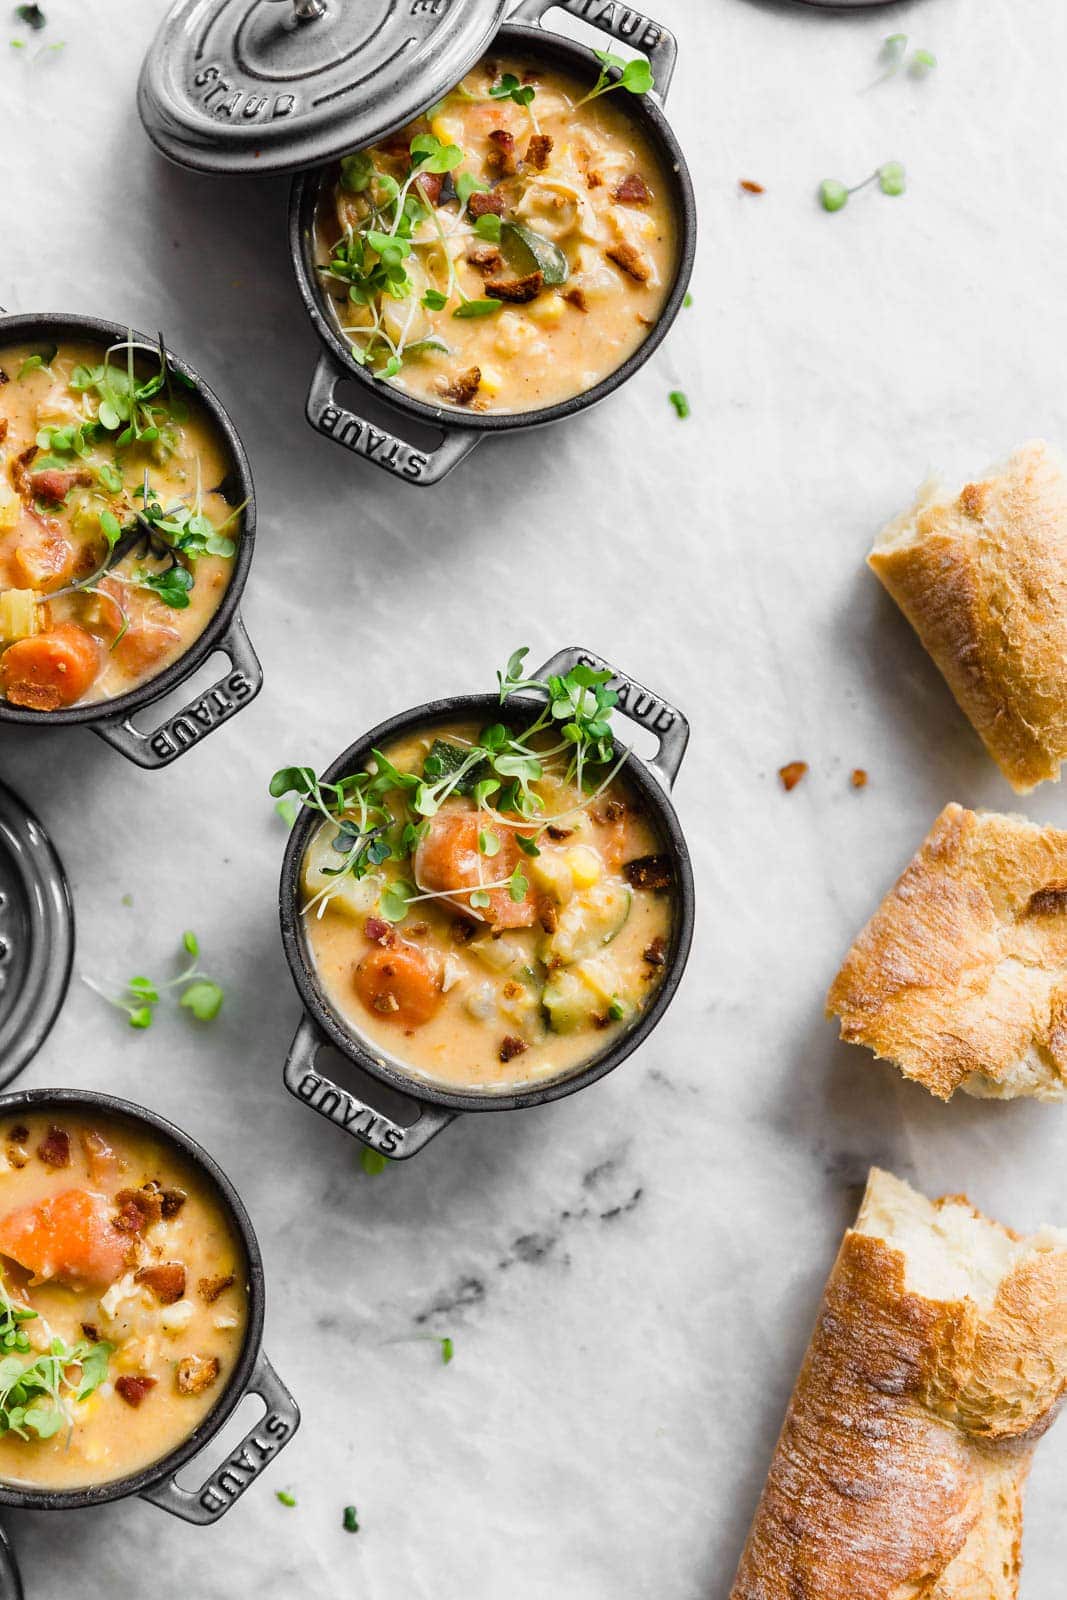 A lightened up version of the classic Creamy Chicken Corn Chowder. Perfect comfort food for colder days!